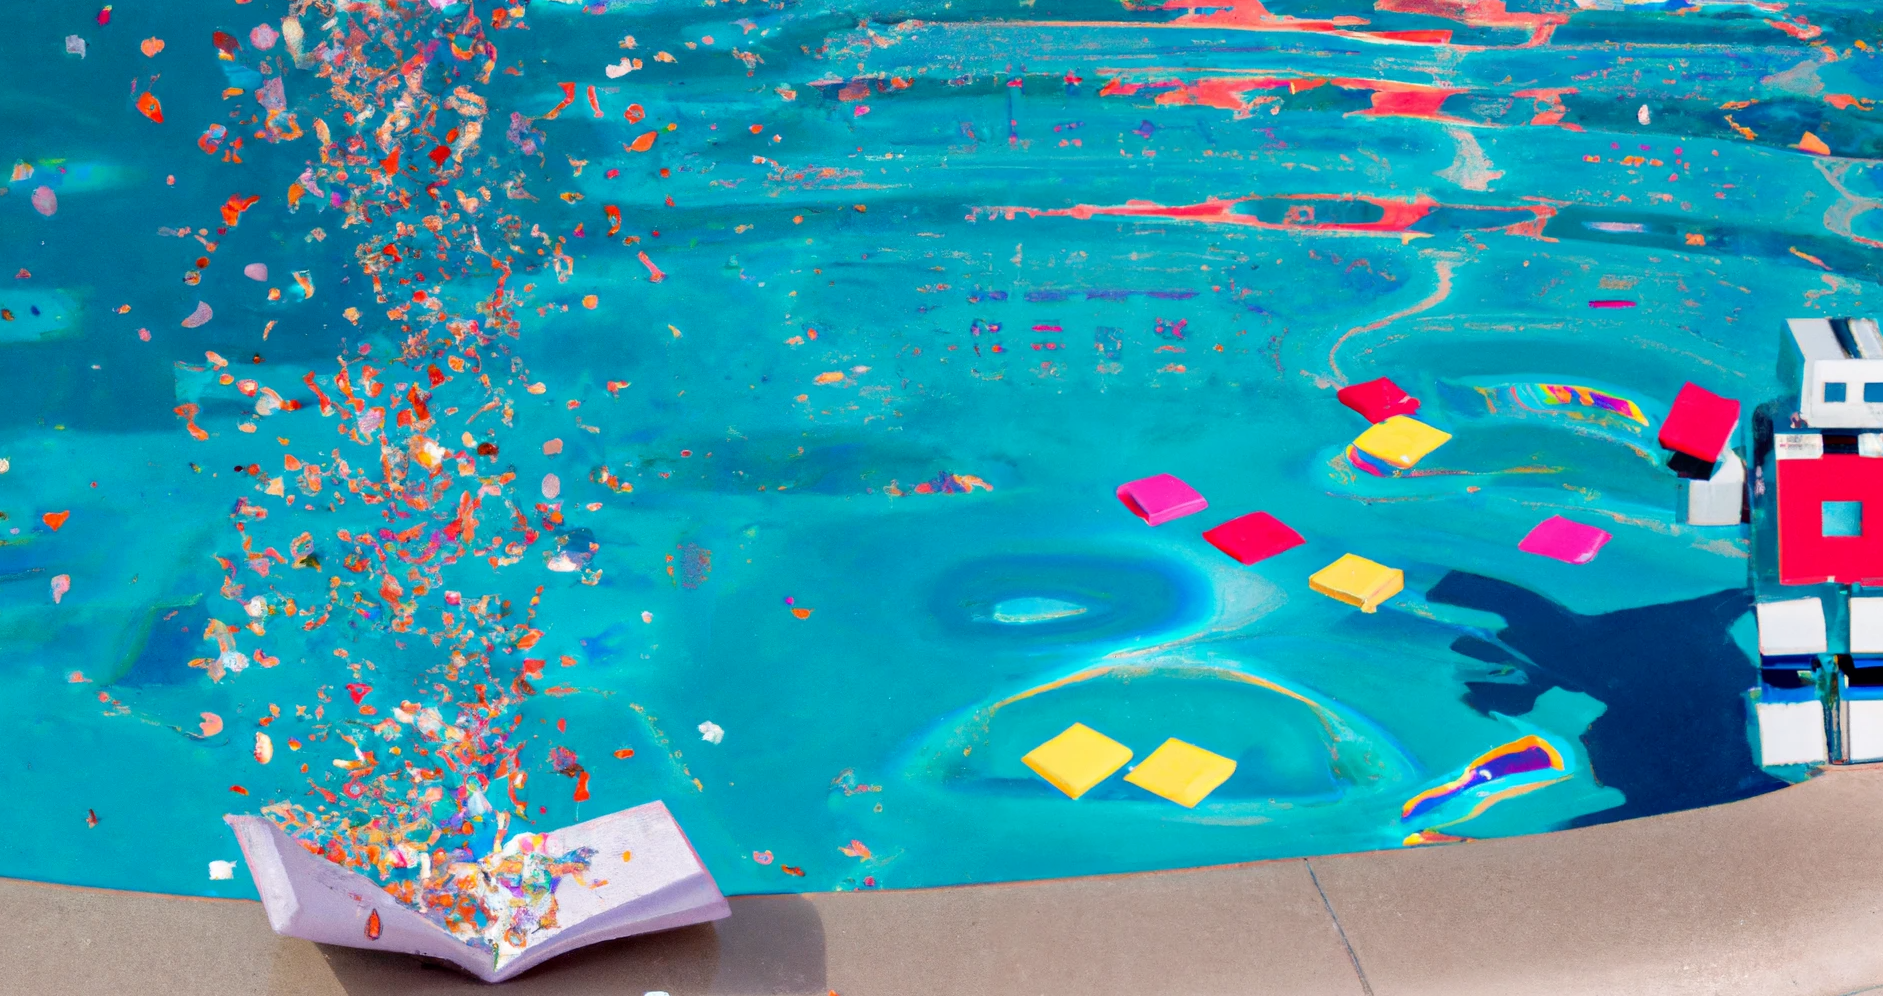 DALL·E 2022-10-05 11-23-29 - confetti exploding from an open book in a swimming pool